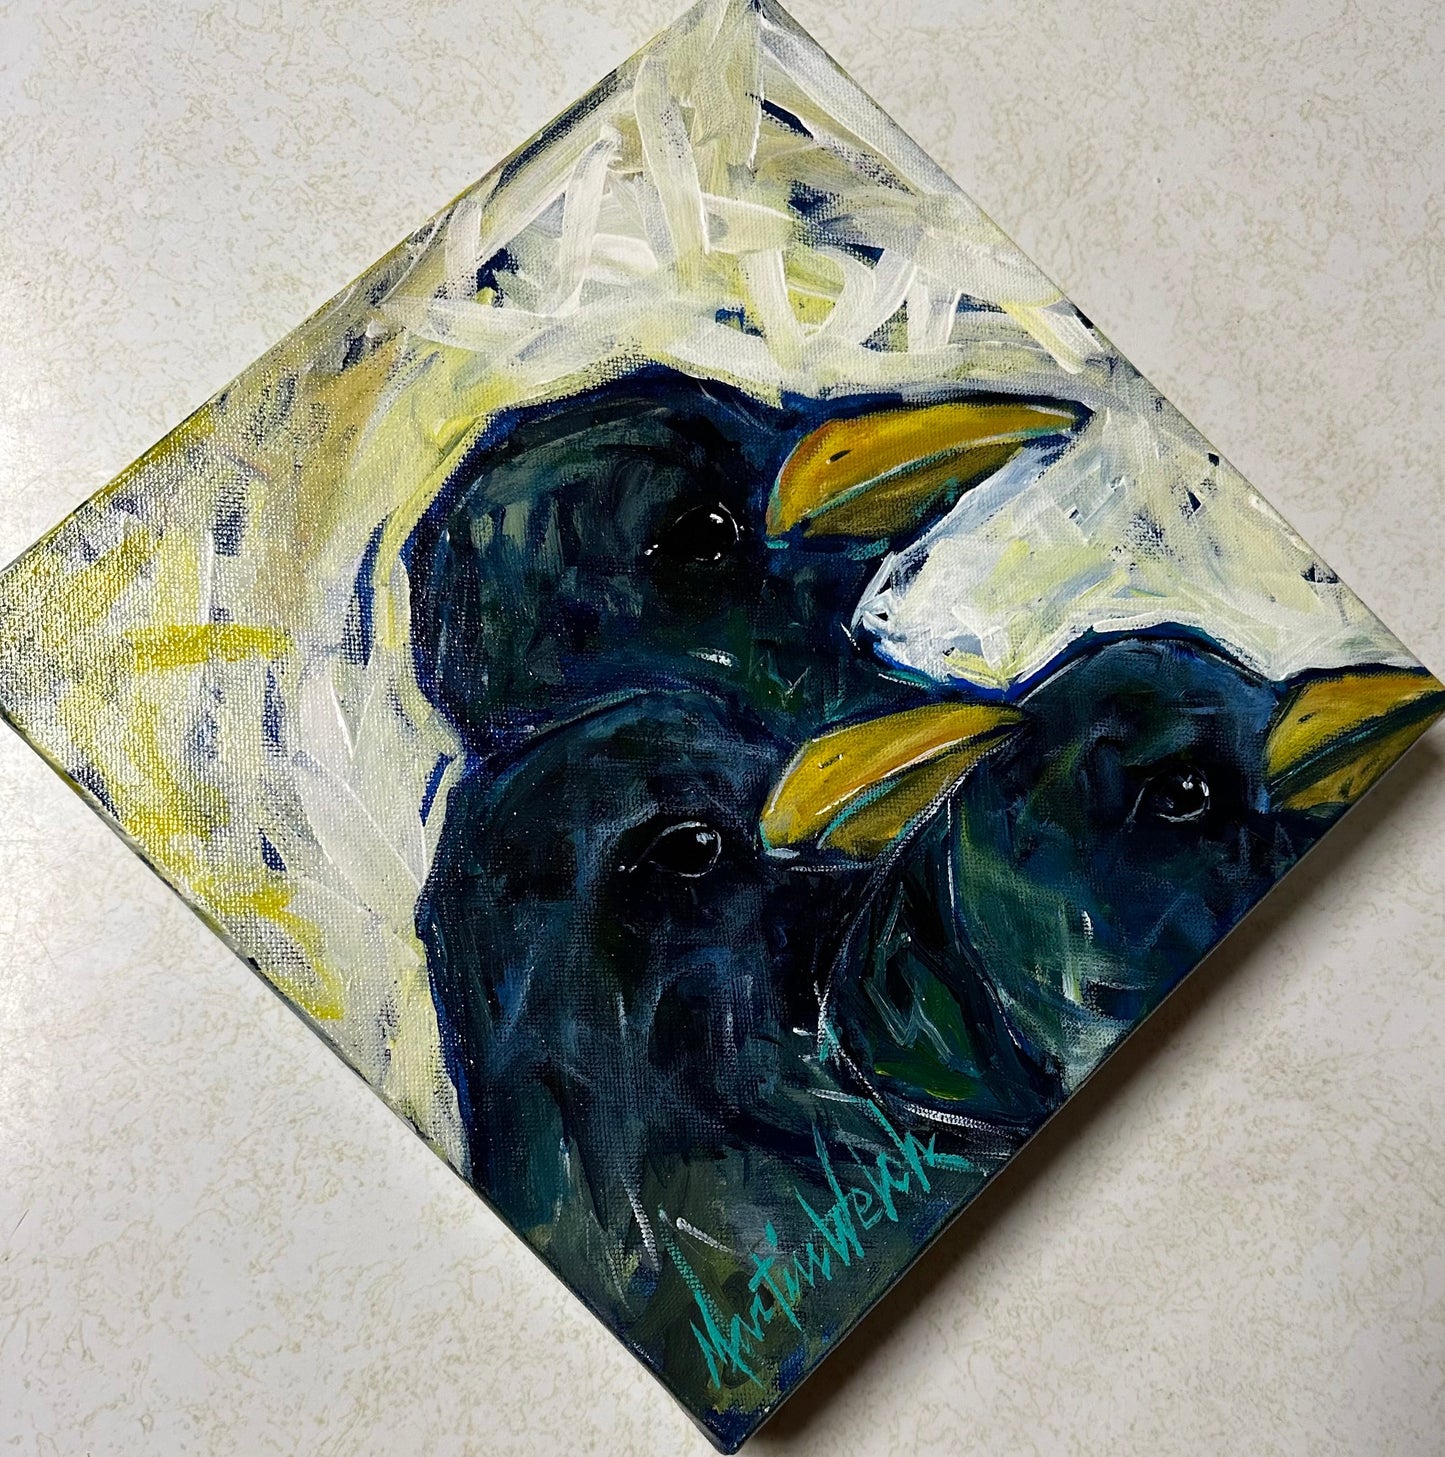 "Baked in a Pie" Original Painting 12"x12" of Blackbirds or Crows